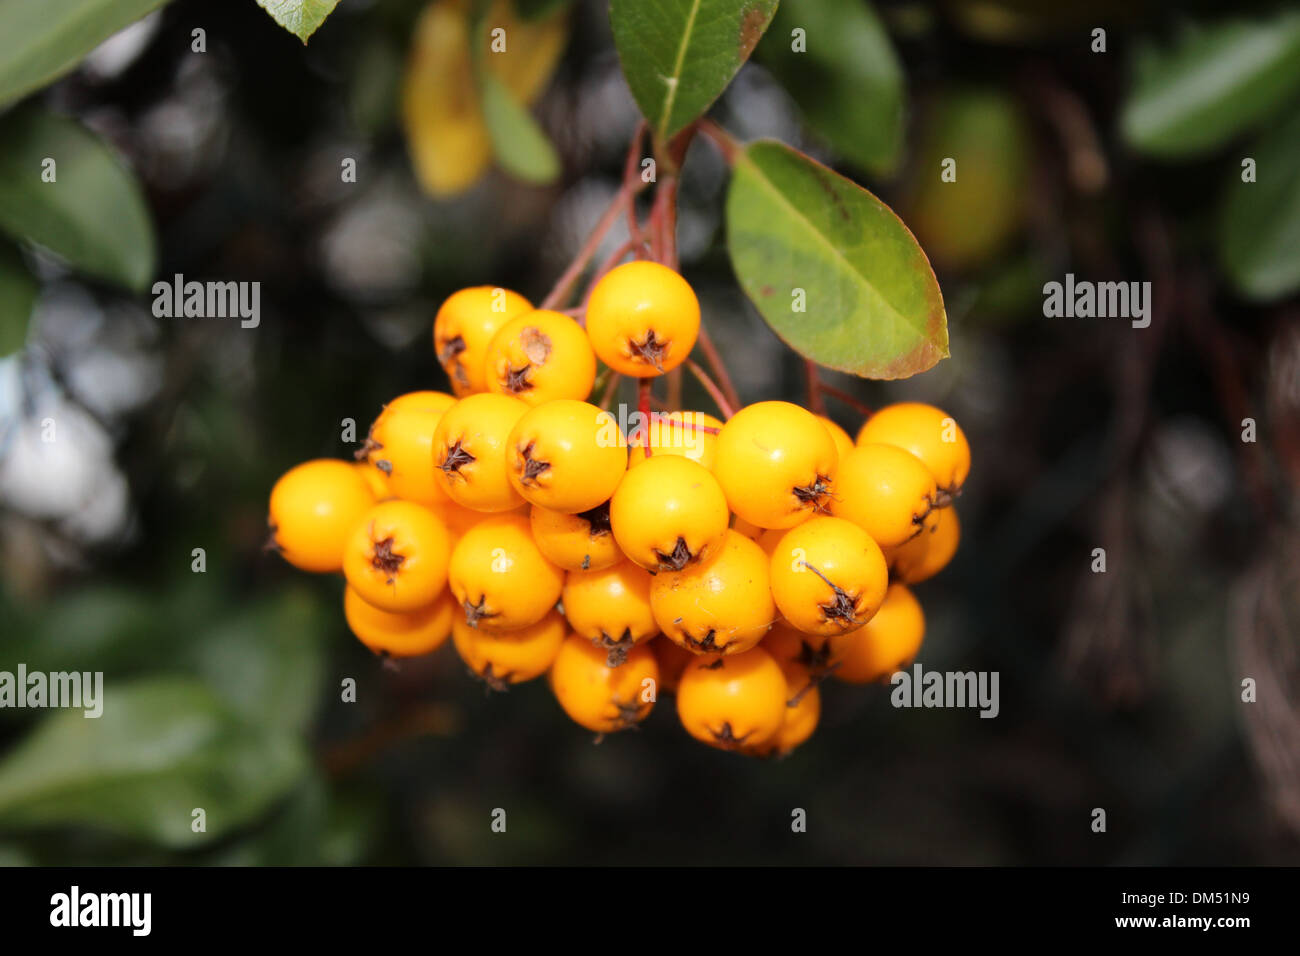 Yellow Berries in the foreground and the background is blurred. Stock Photo